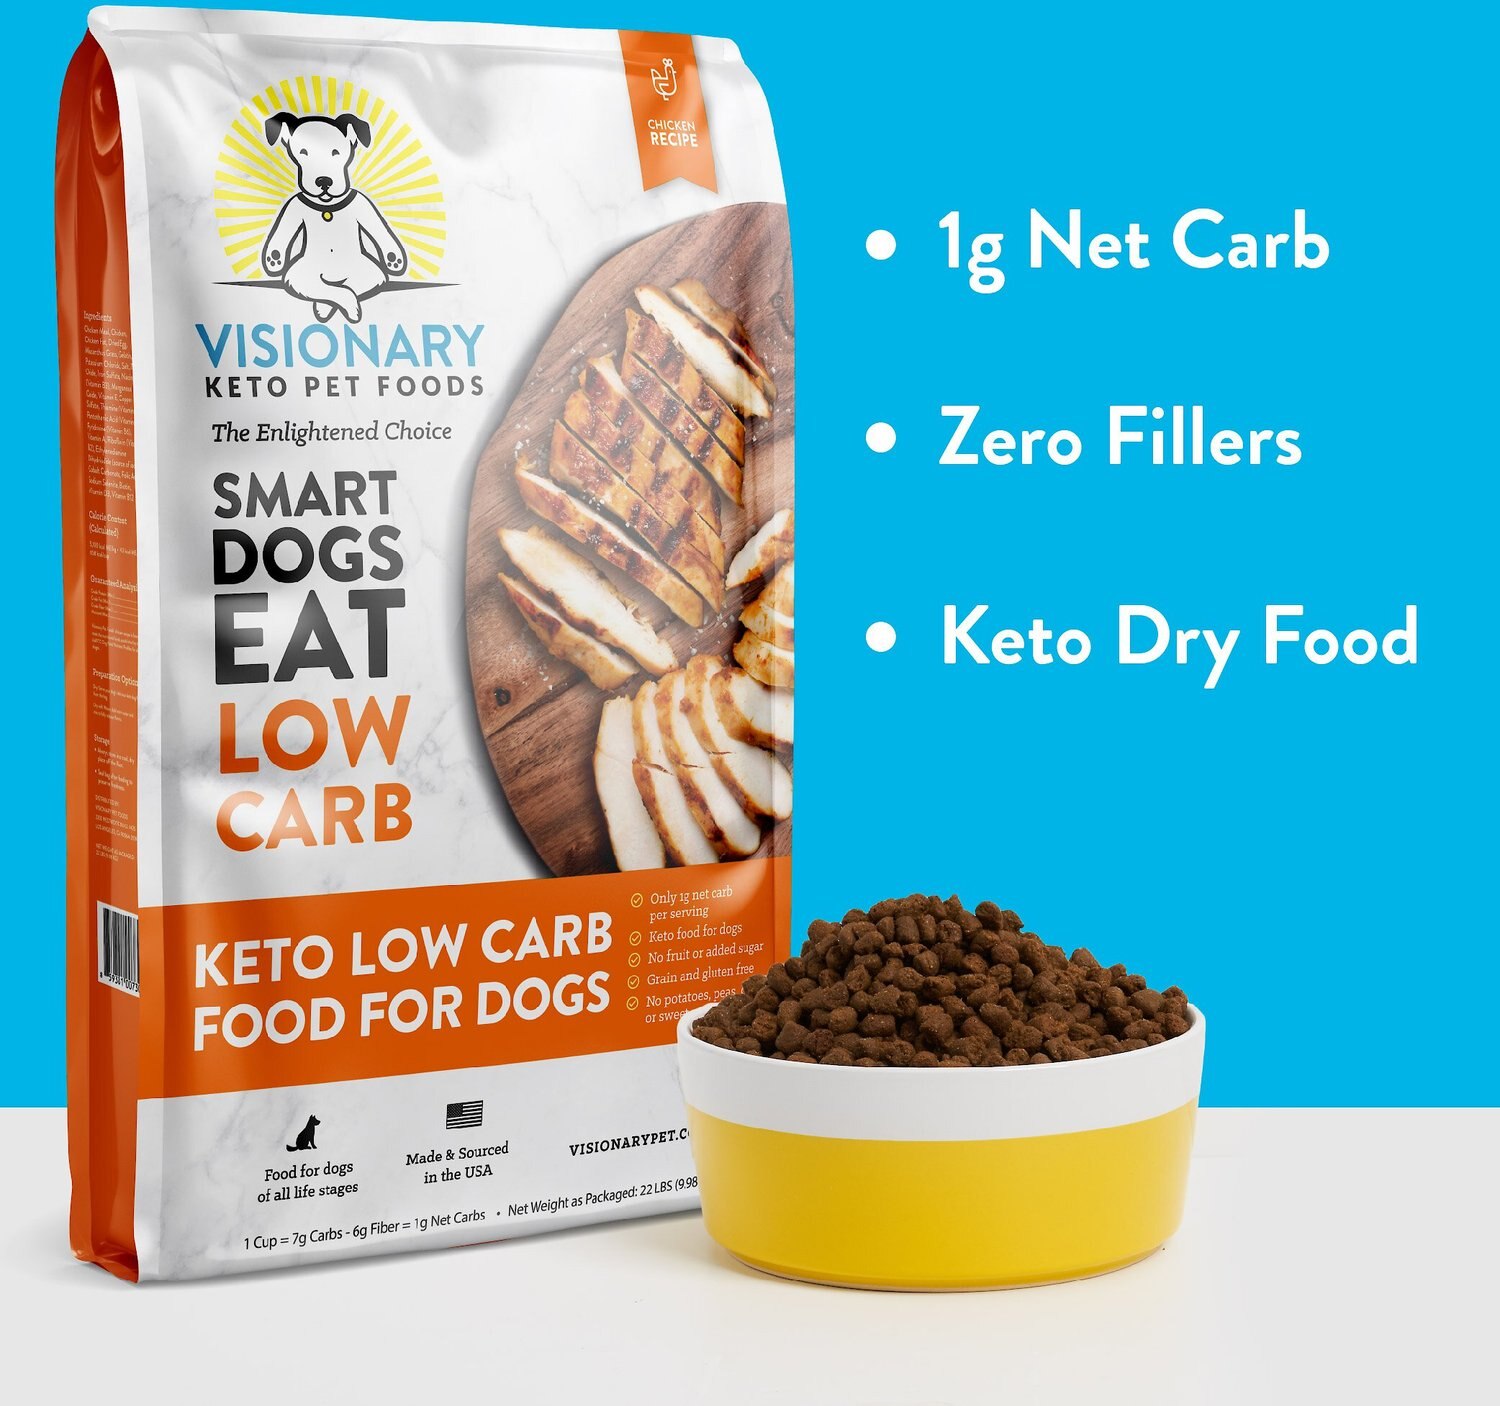 VISIONARY PET FOODS Keto Low Carb Chicken Recipe Dry Dog Food, 22lb